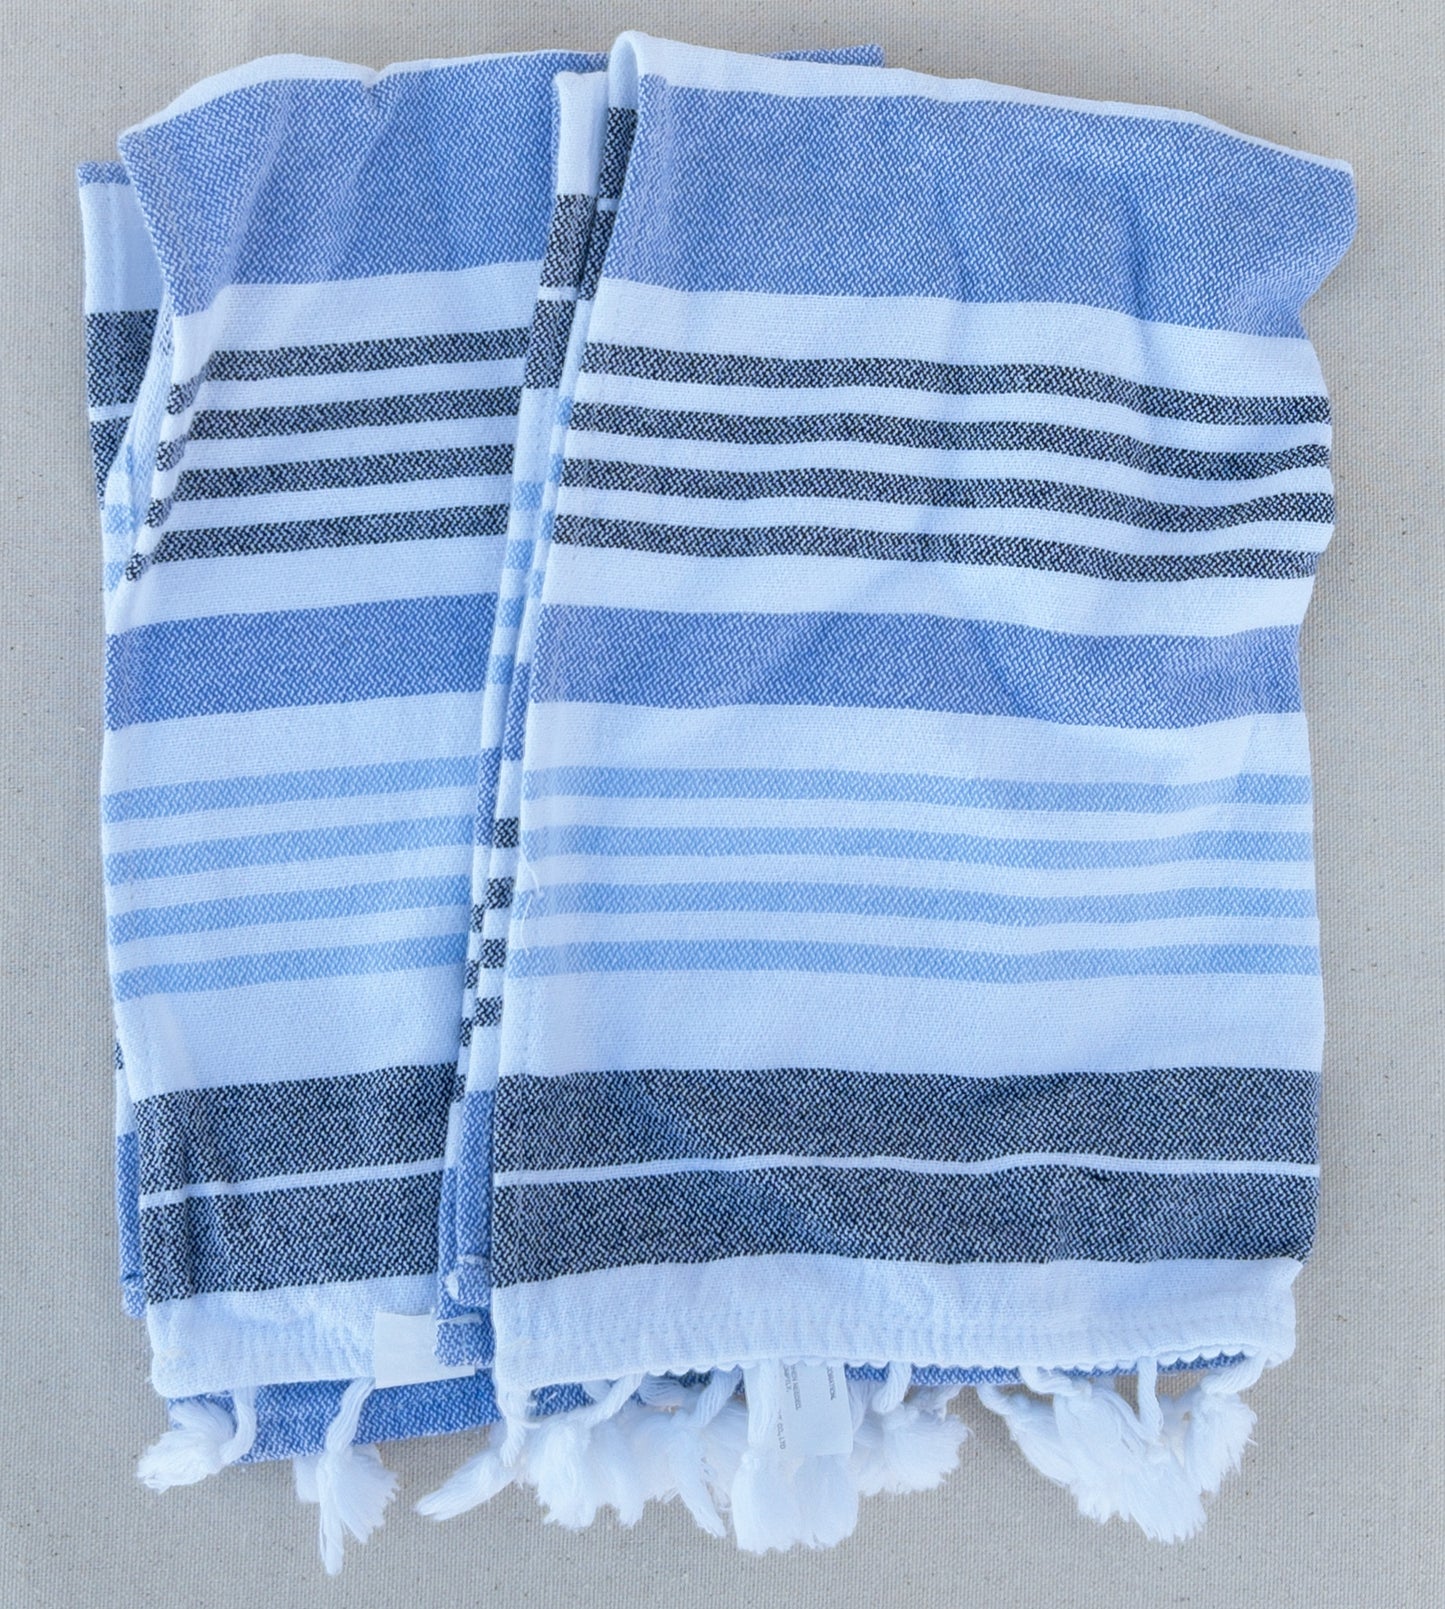 Hand Towels with Tassel